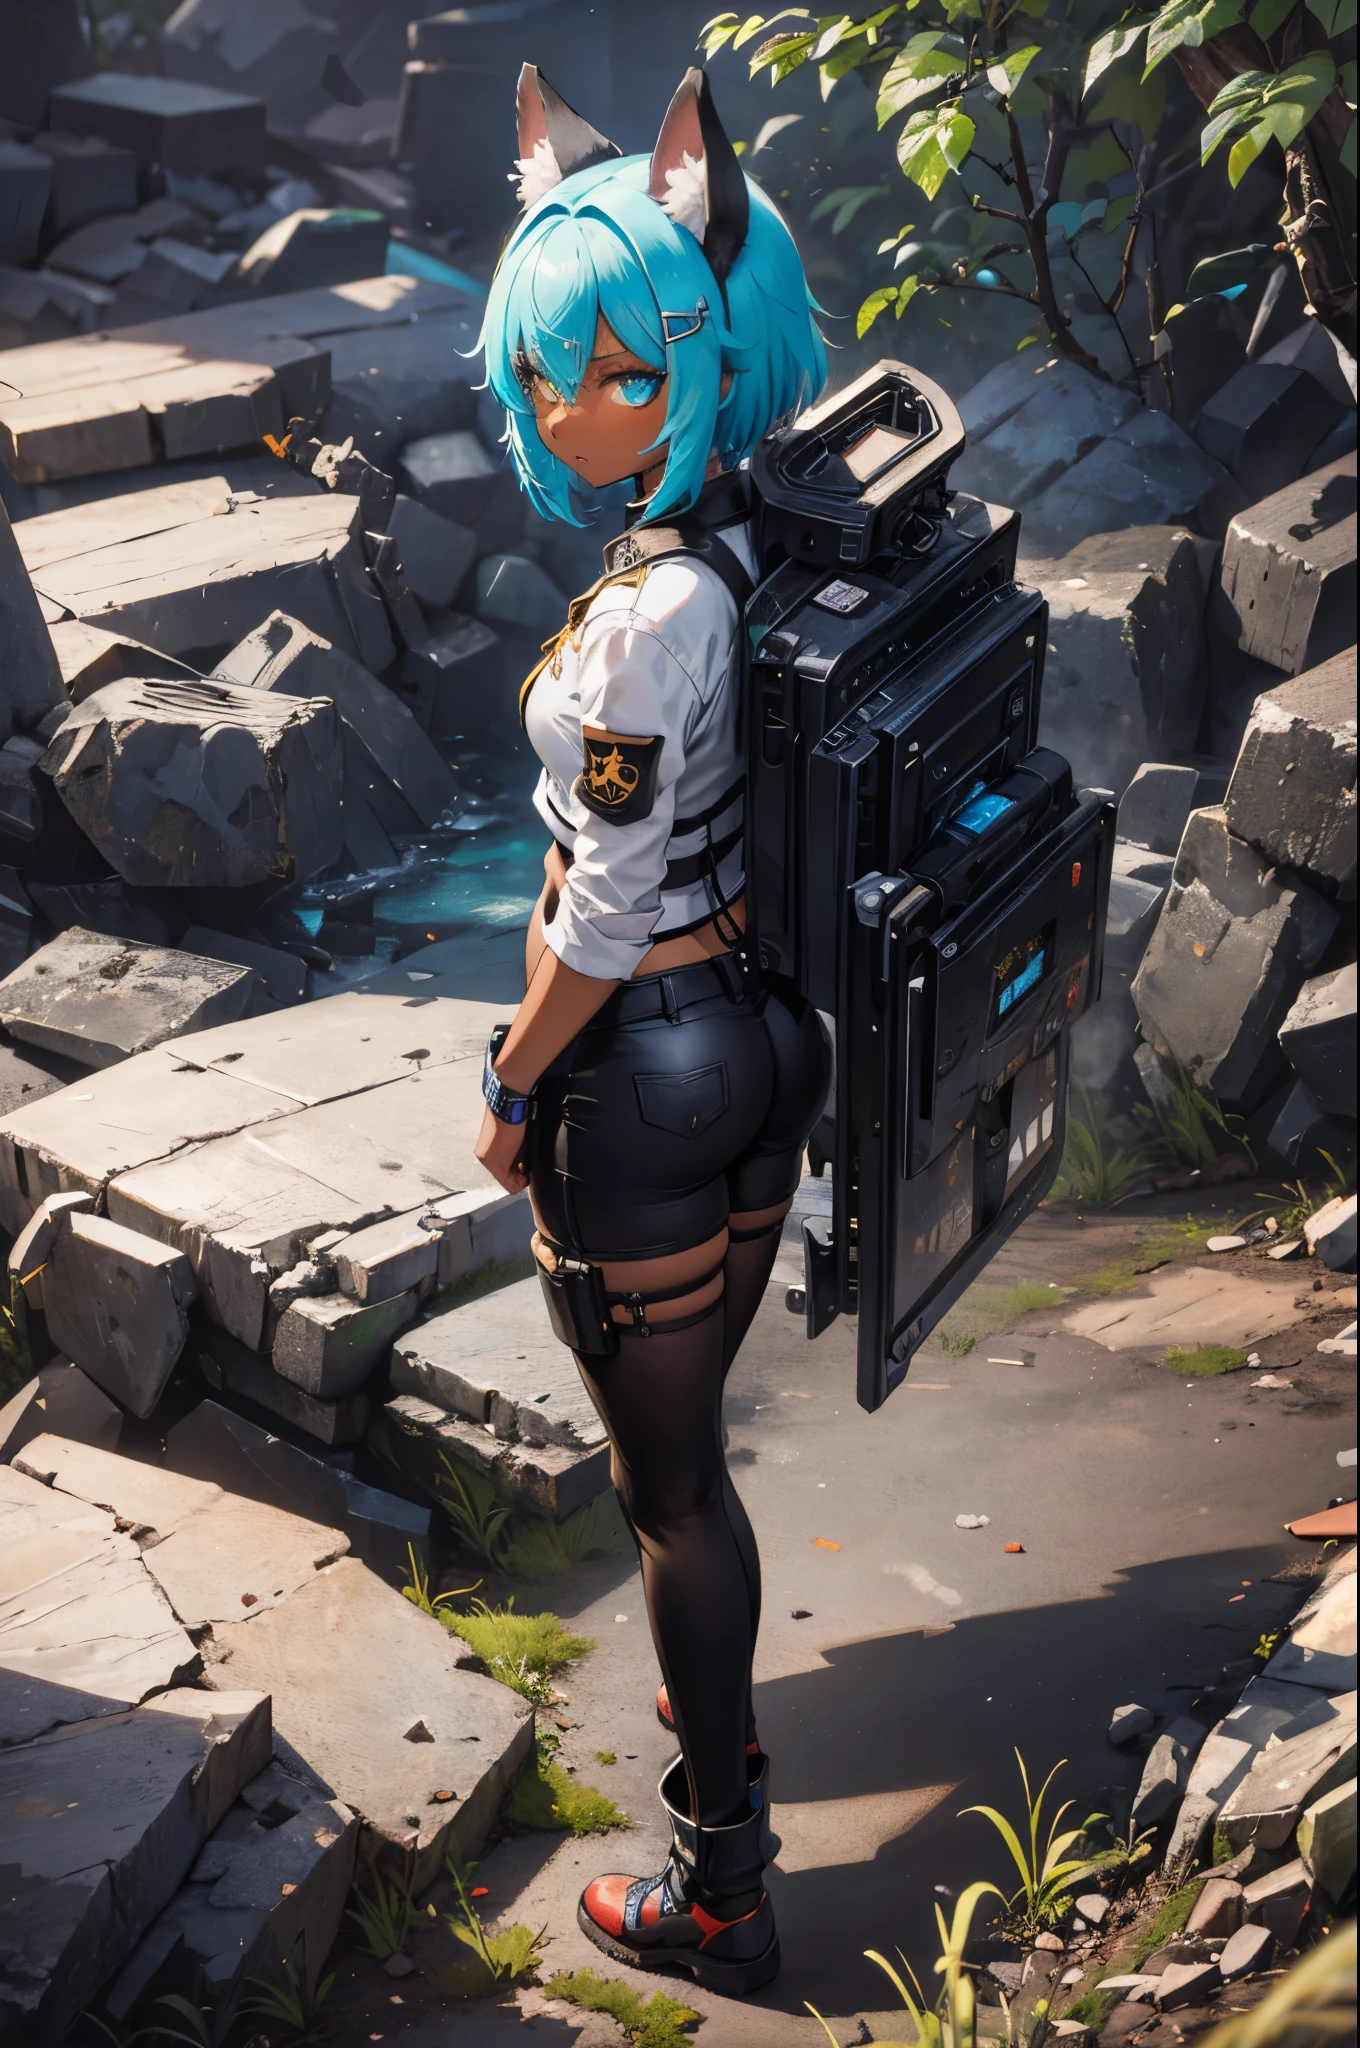 8K, Best Quality, Masterpiece, Ultra High Resolution, girl, short blue hair color, (short length cyan blue hair, disheveled hair), bright blue eyes, 1girl, black and white fox ears with piercings, blue hair, fantasy world, dark skin, dark skinned, 15 year old girl, big ass, black skin toned girl, black girl, fox ears, dark skin, dark skin toned girl, ranger, sniper girl, outside, badlands, wearing bandits attire, rough looking outfit, a very worn outfit, wearing light clothing, has fox ears, out in the wastelands, in a wasteland, out in the middle of nowhere, in the wilderness, sniper rifle strapped to her back